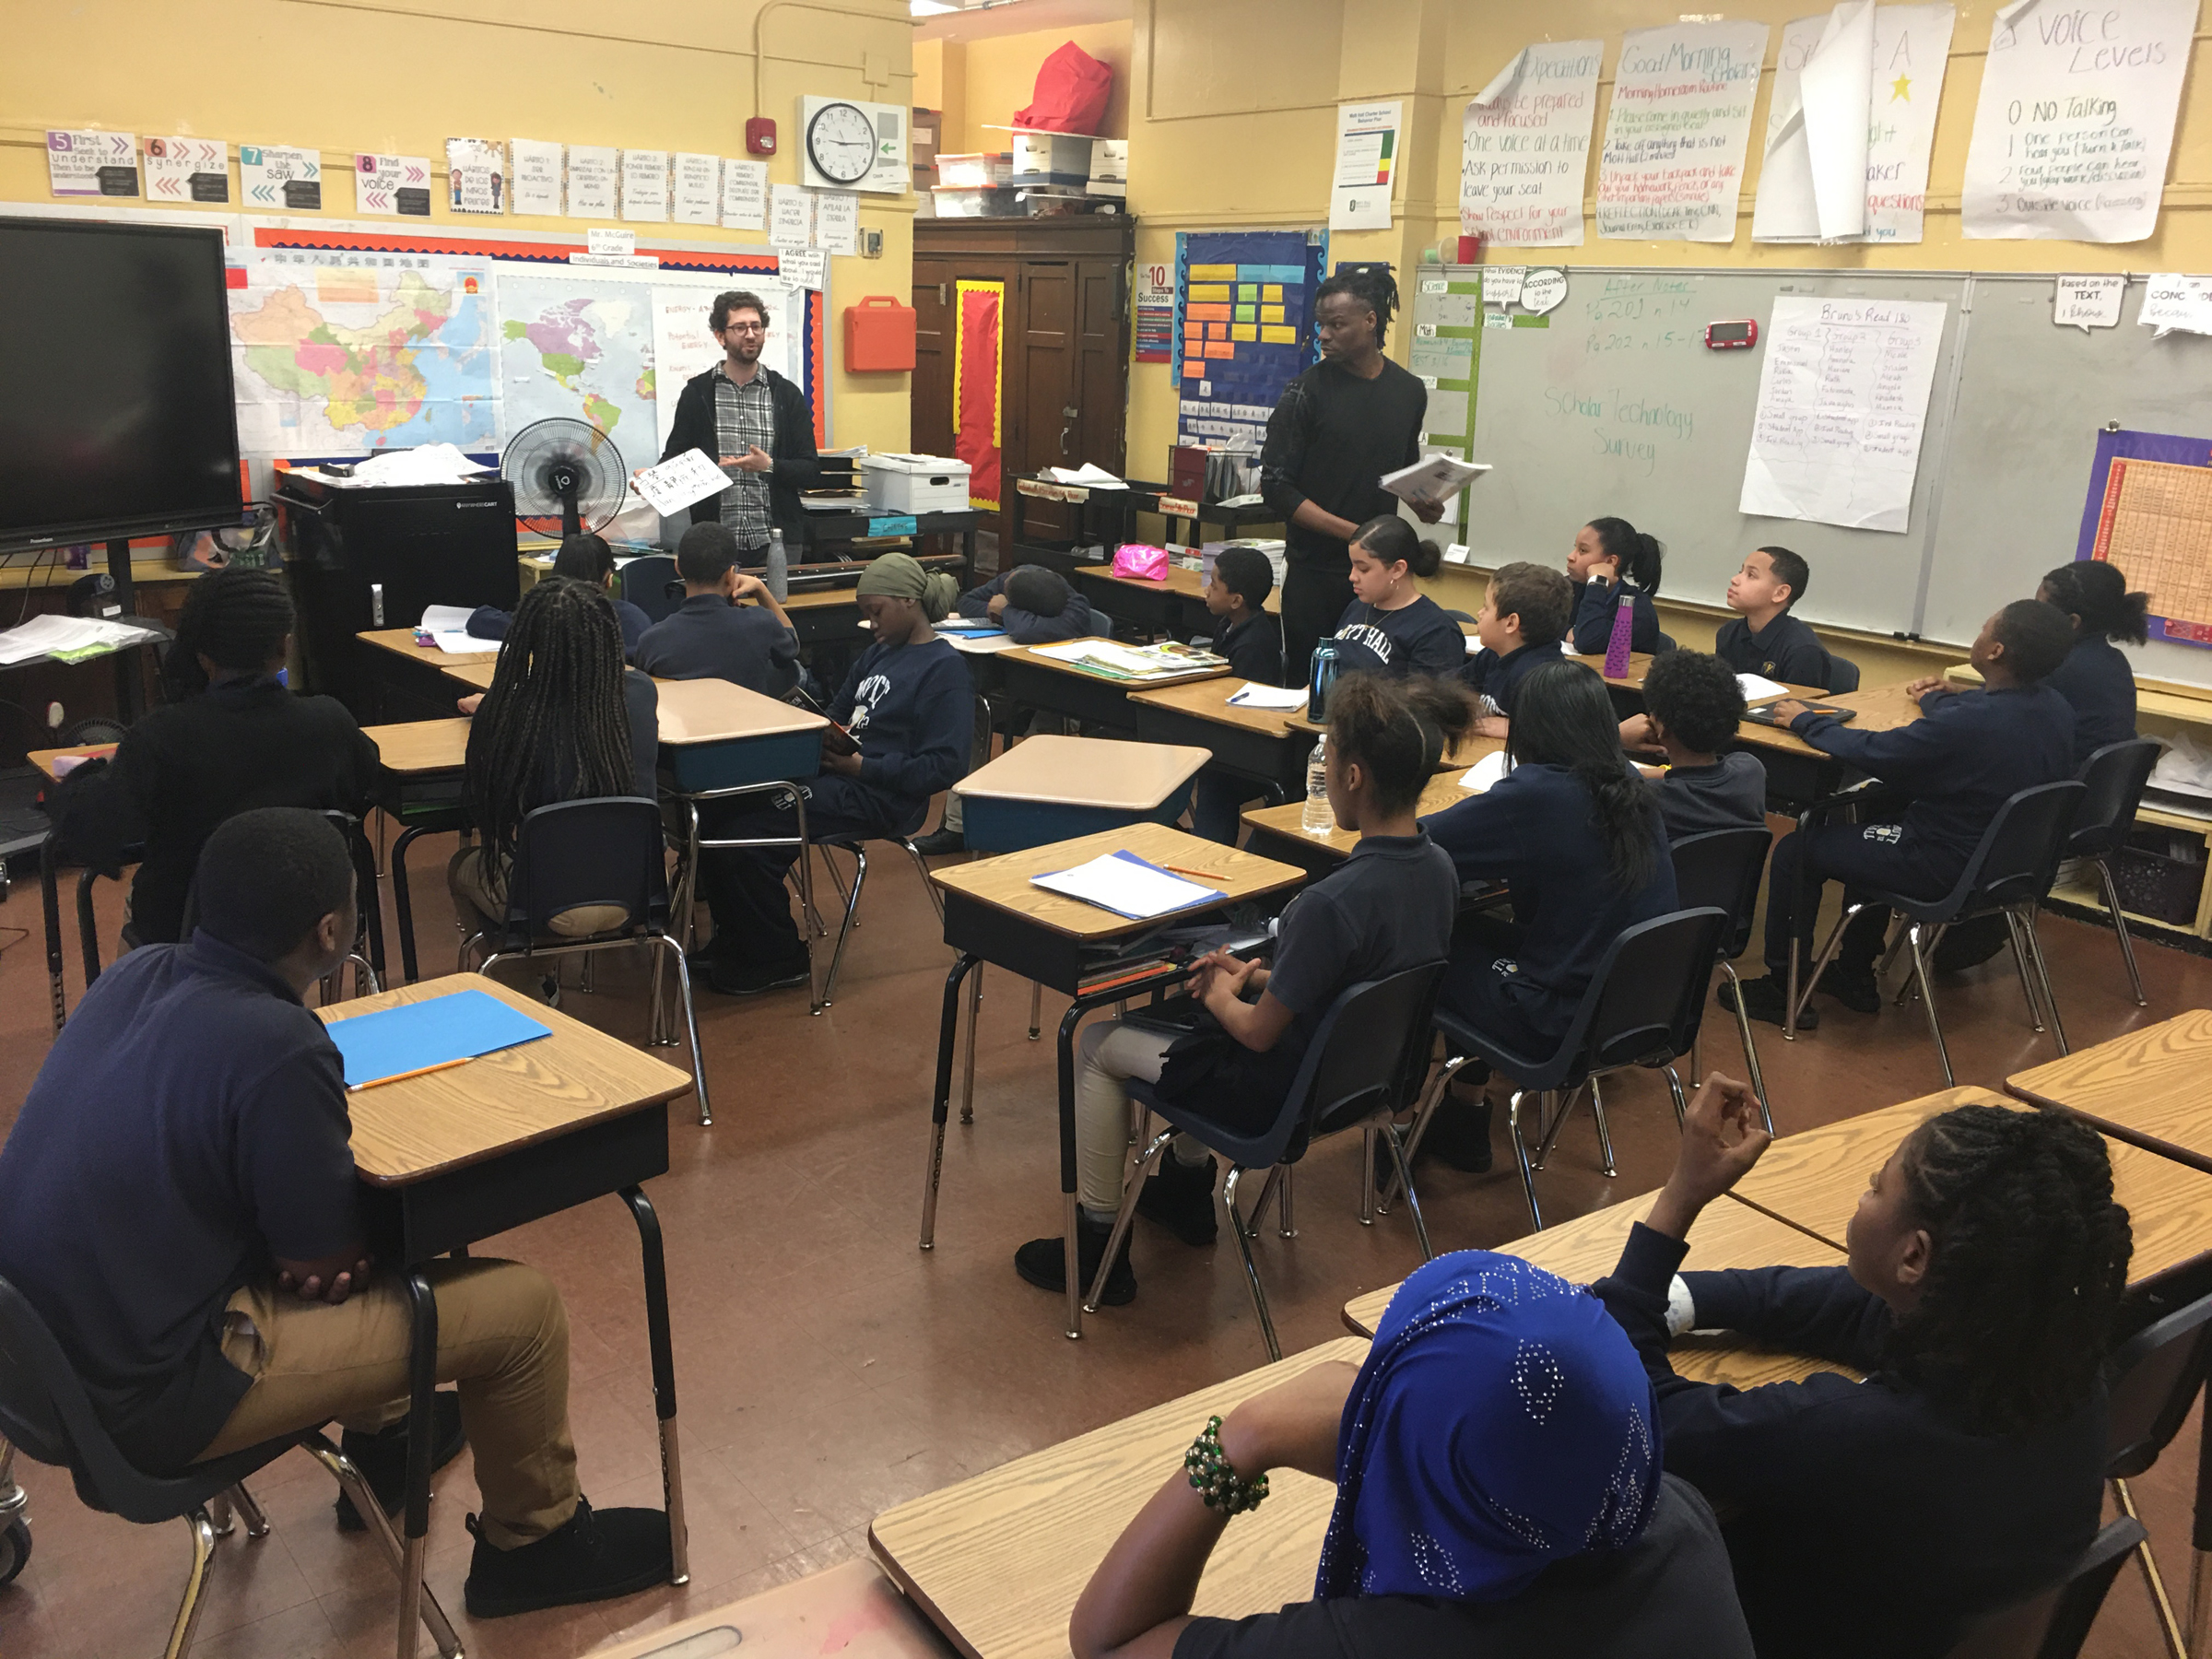 Mott Hall Charter School: Accepting Applications For The 2021-2022 School Year